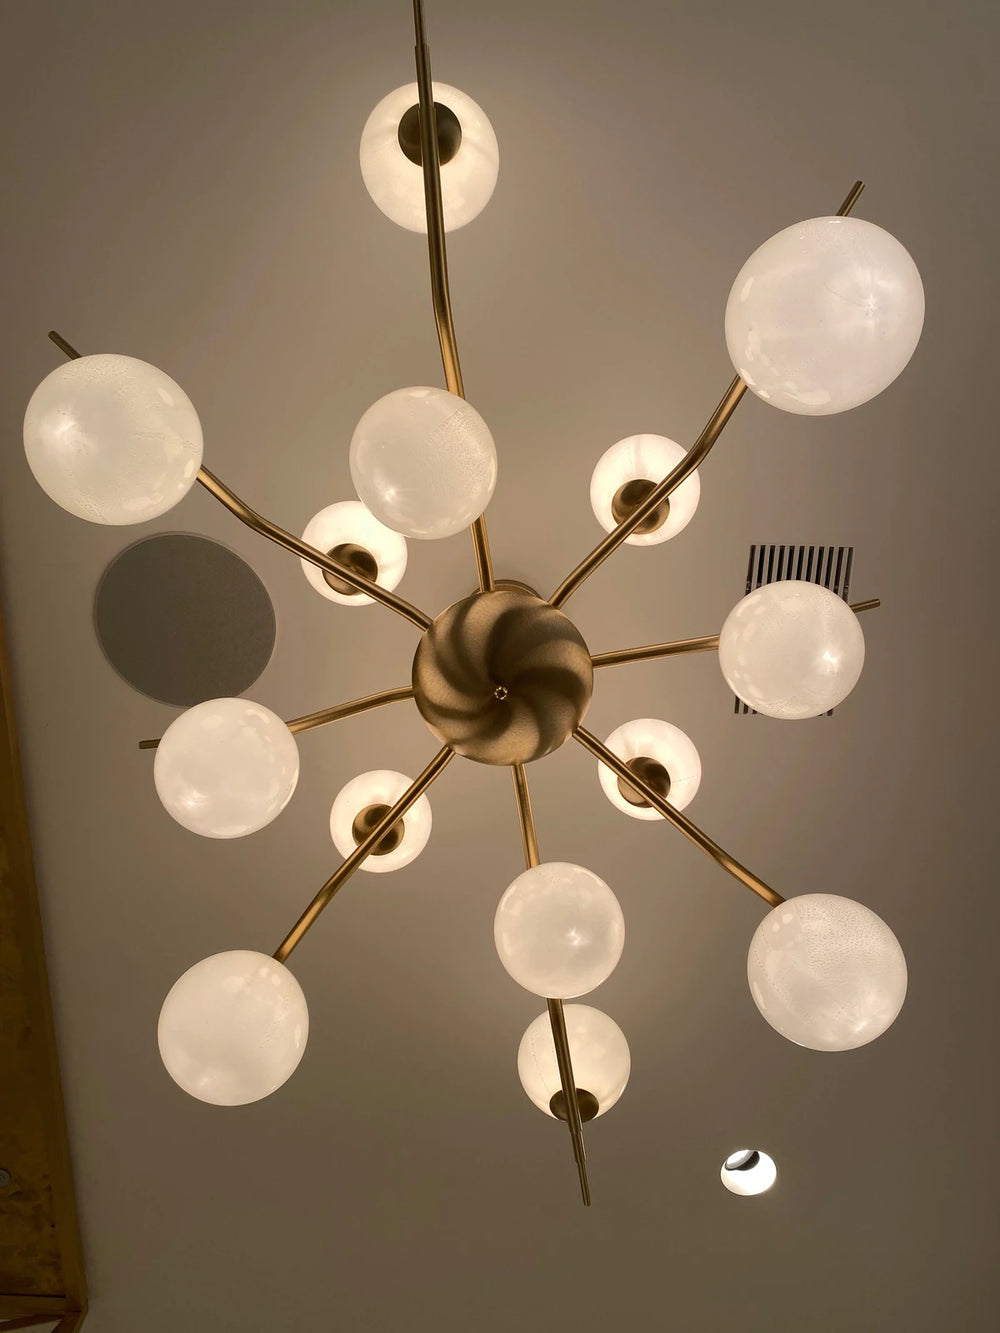 Mid-Century Styled Matching Ceiling Light With Pendant Lights Blown Glass